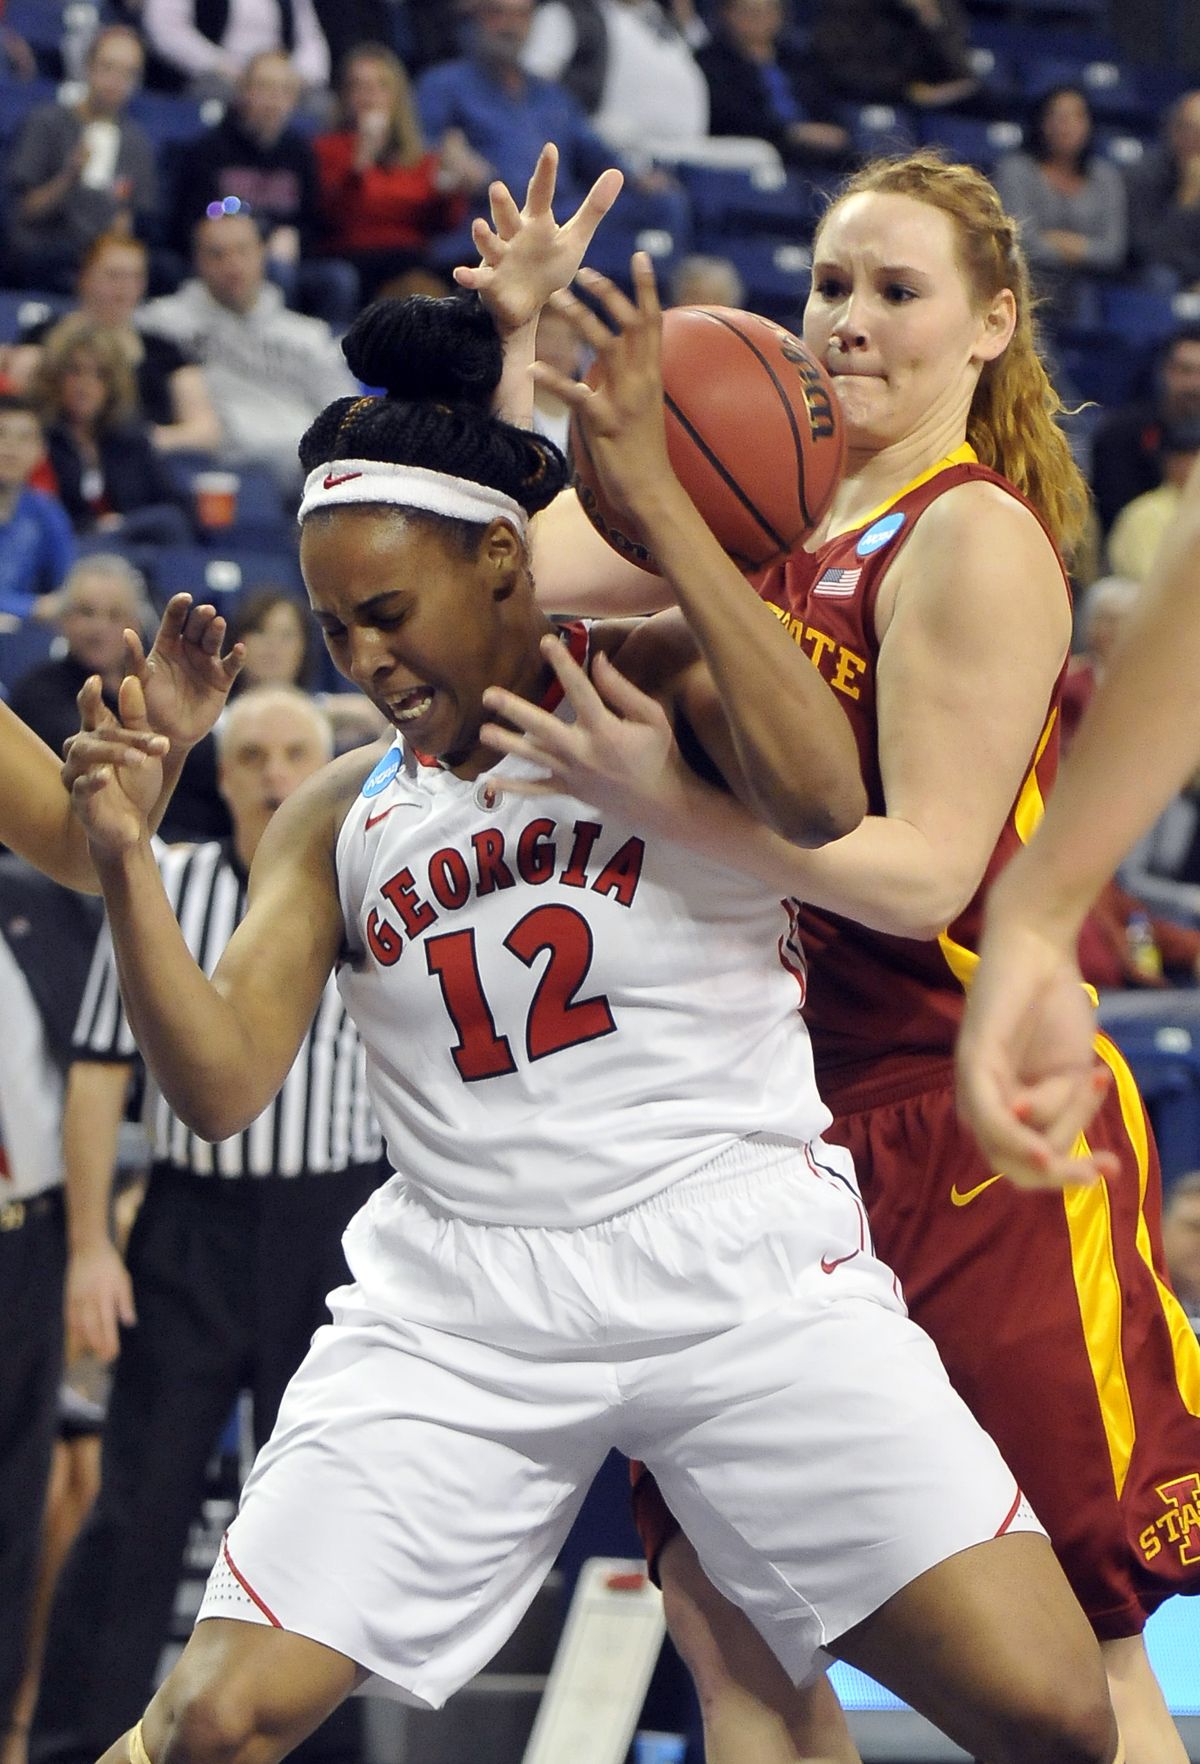 Georgia’s Jasmine Hassell and Iowa State’s Chelsea Poppens try to corral a loose ball under the basket during the first half Monday at the McCarthey Athletic Center. (Jesse Tinsley)